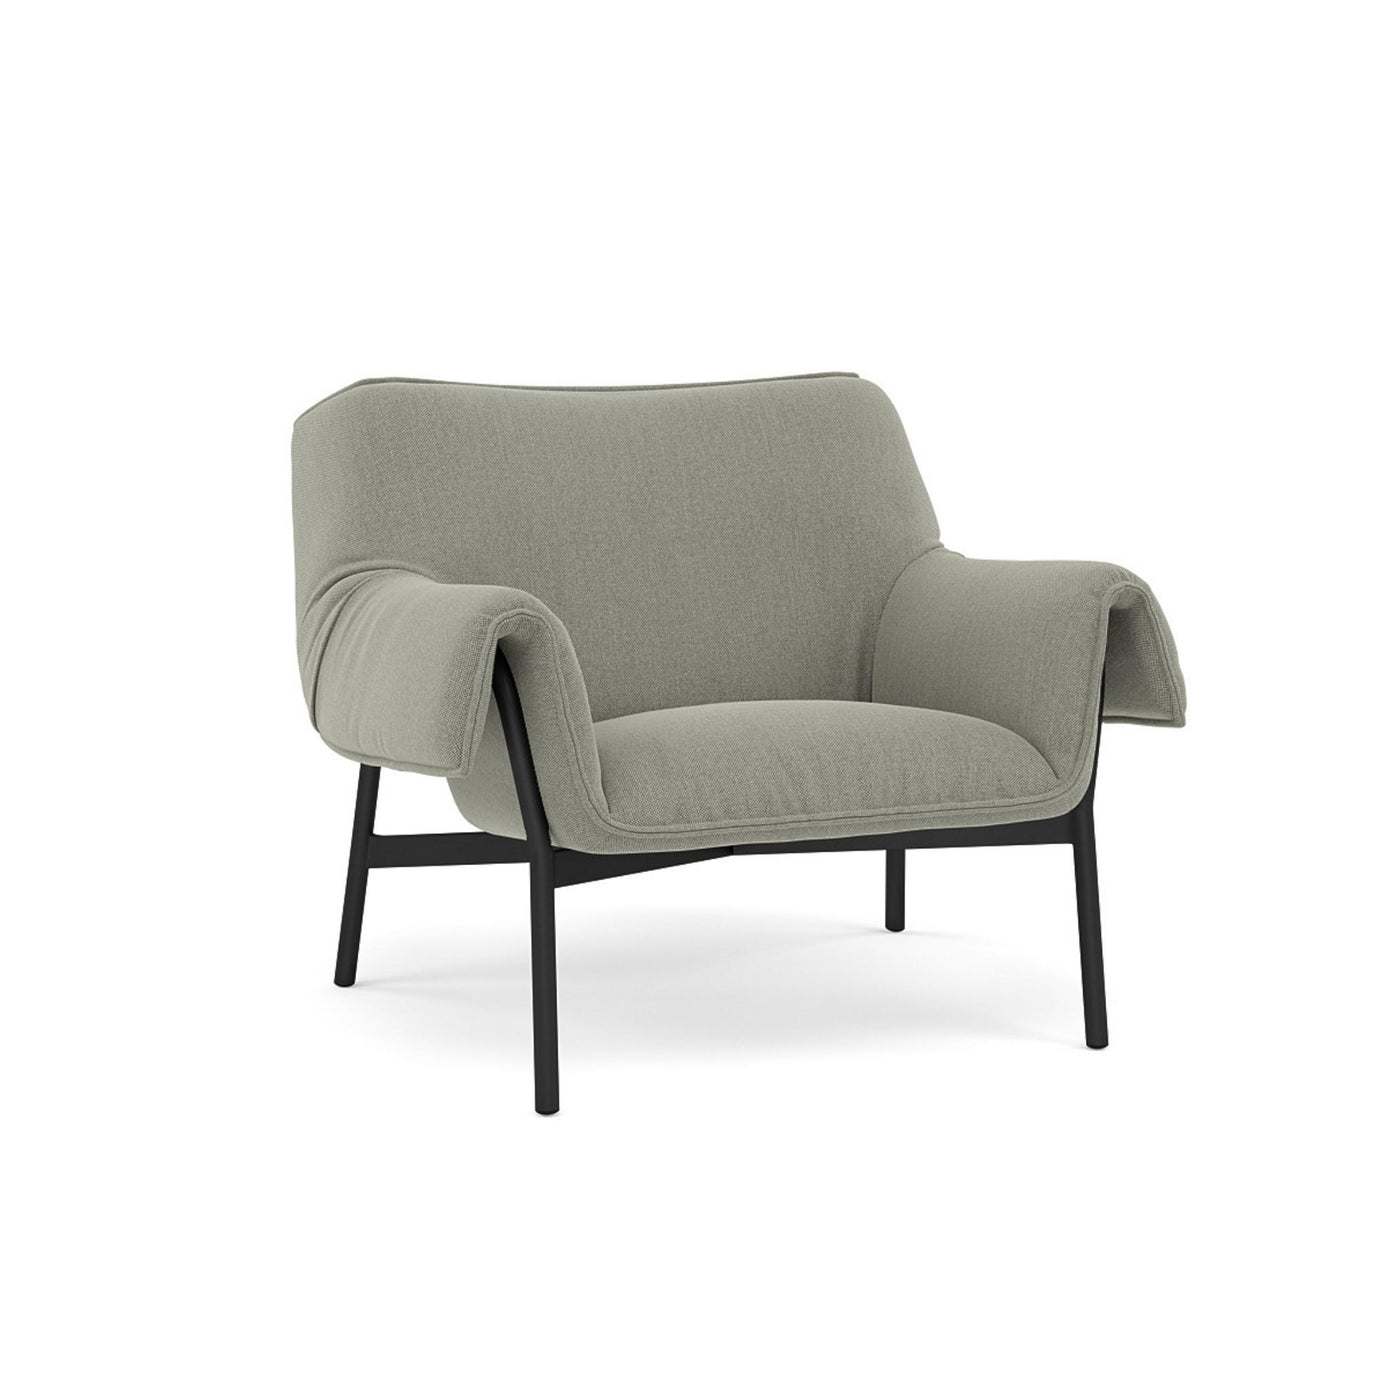 Muuto Wrap Lounge Chair. Made to order from someday designs. #colour_re-wool-408